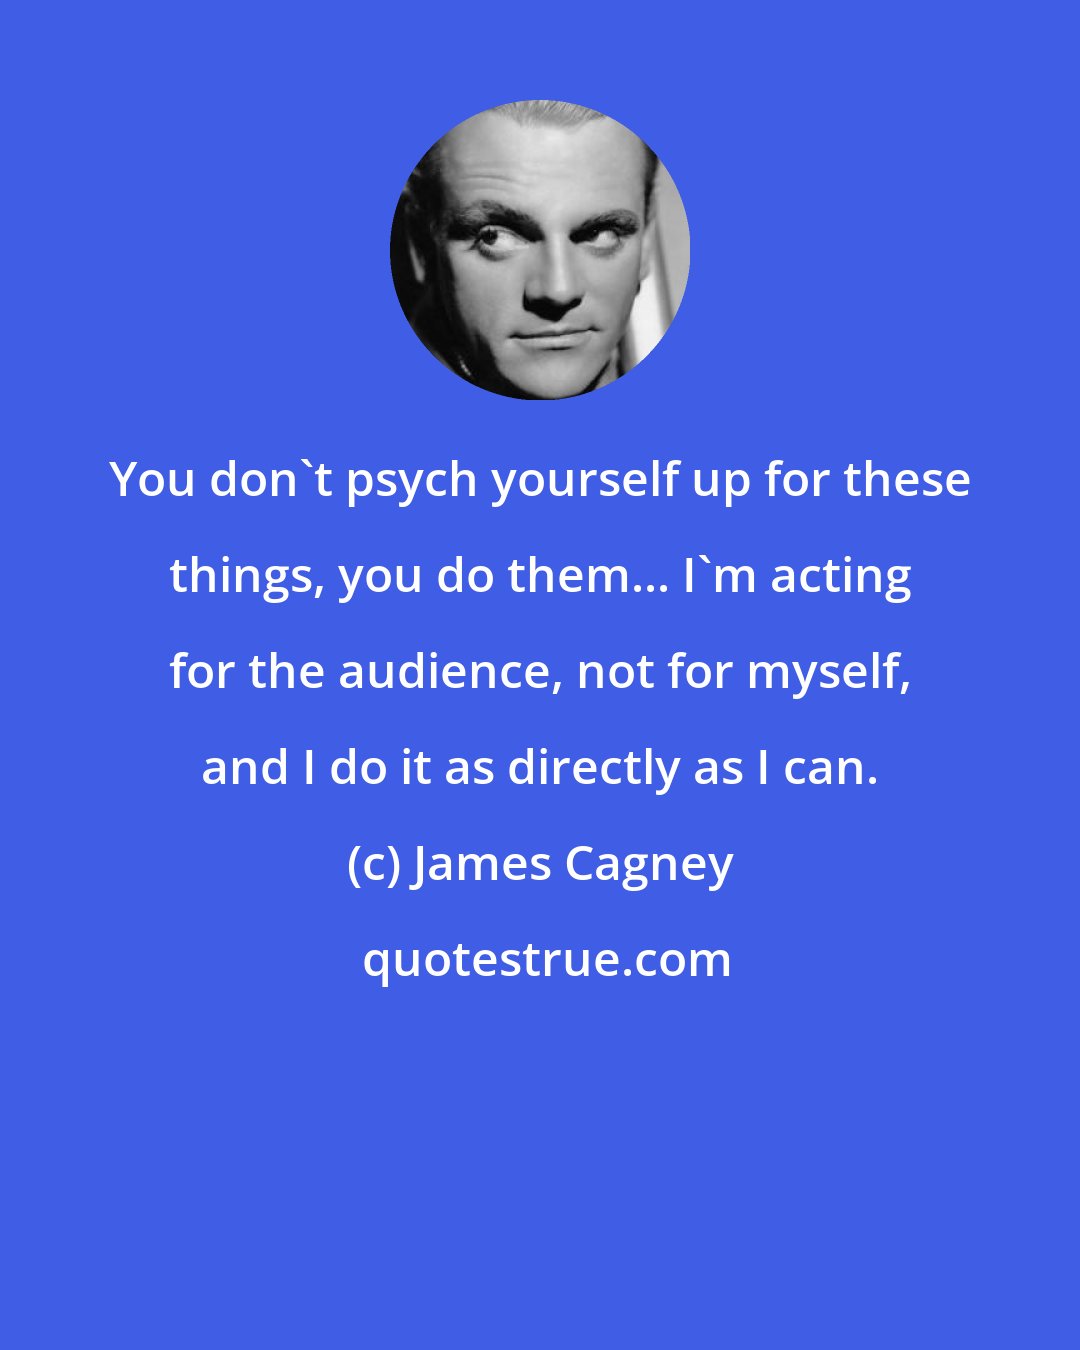 James Cagney: You don't psych yourself up for these things, you do them... I'm acting for the audience, not for myself, and I do it as directly as I can.